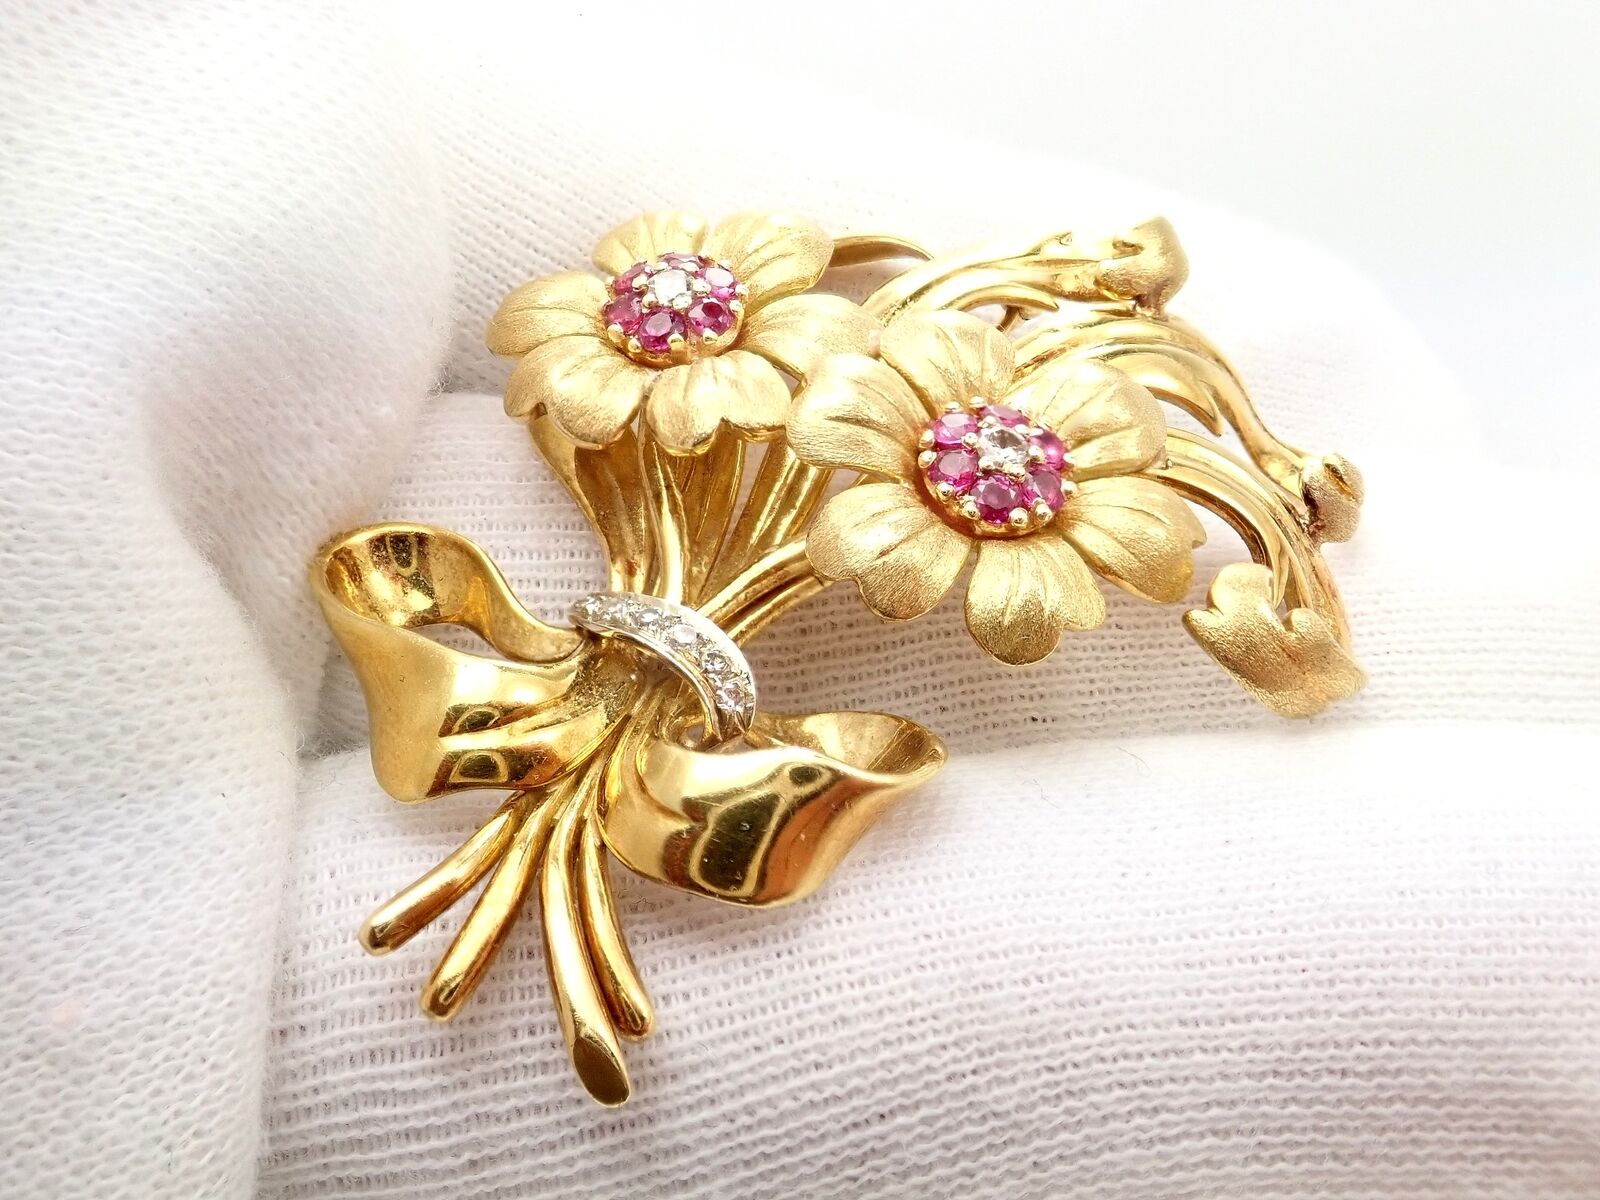 Authentic Vintage Cartier 18k Yellow Gold Ruby Diamond Flower